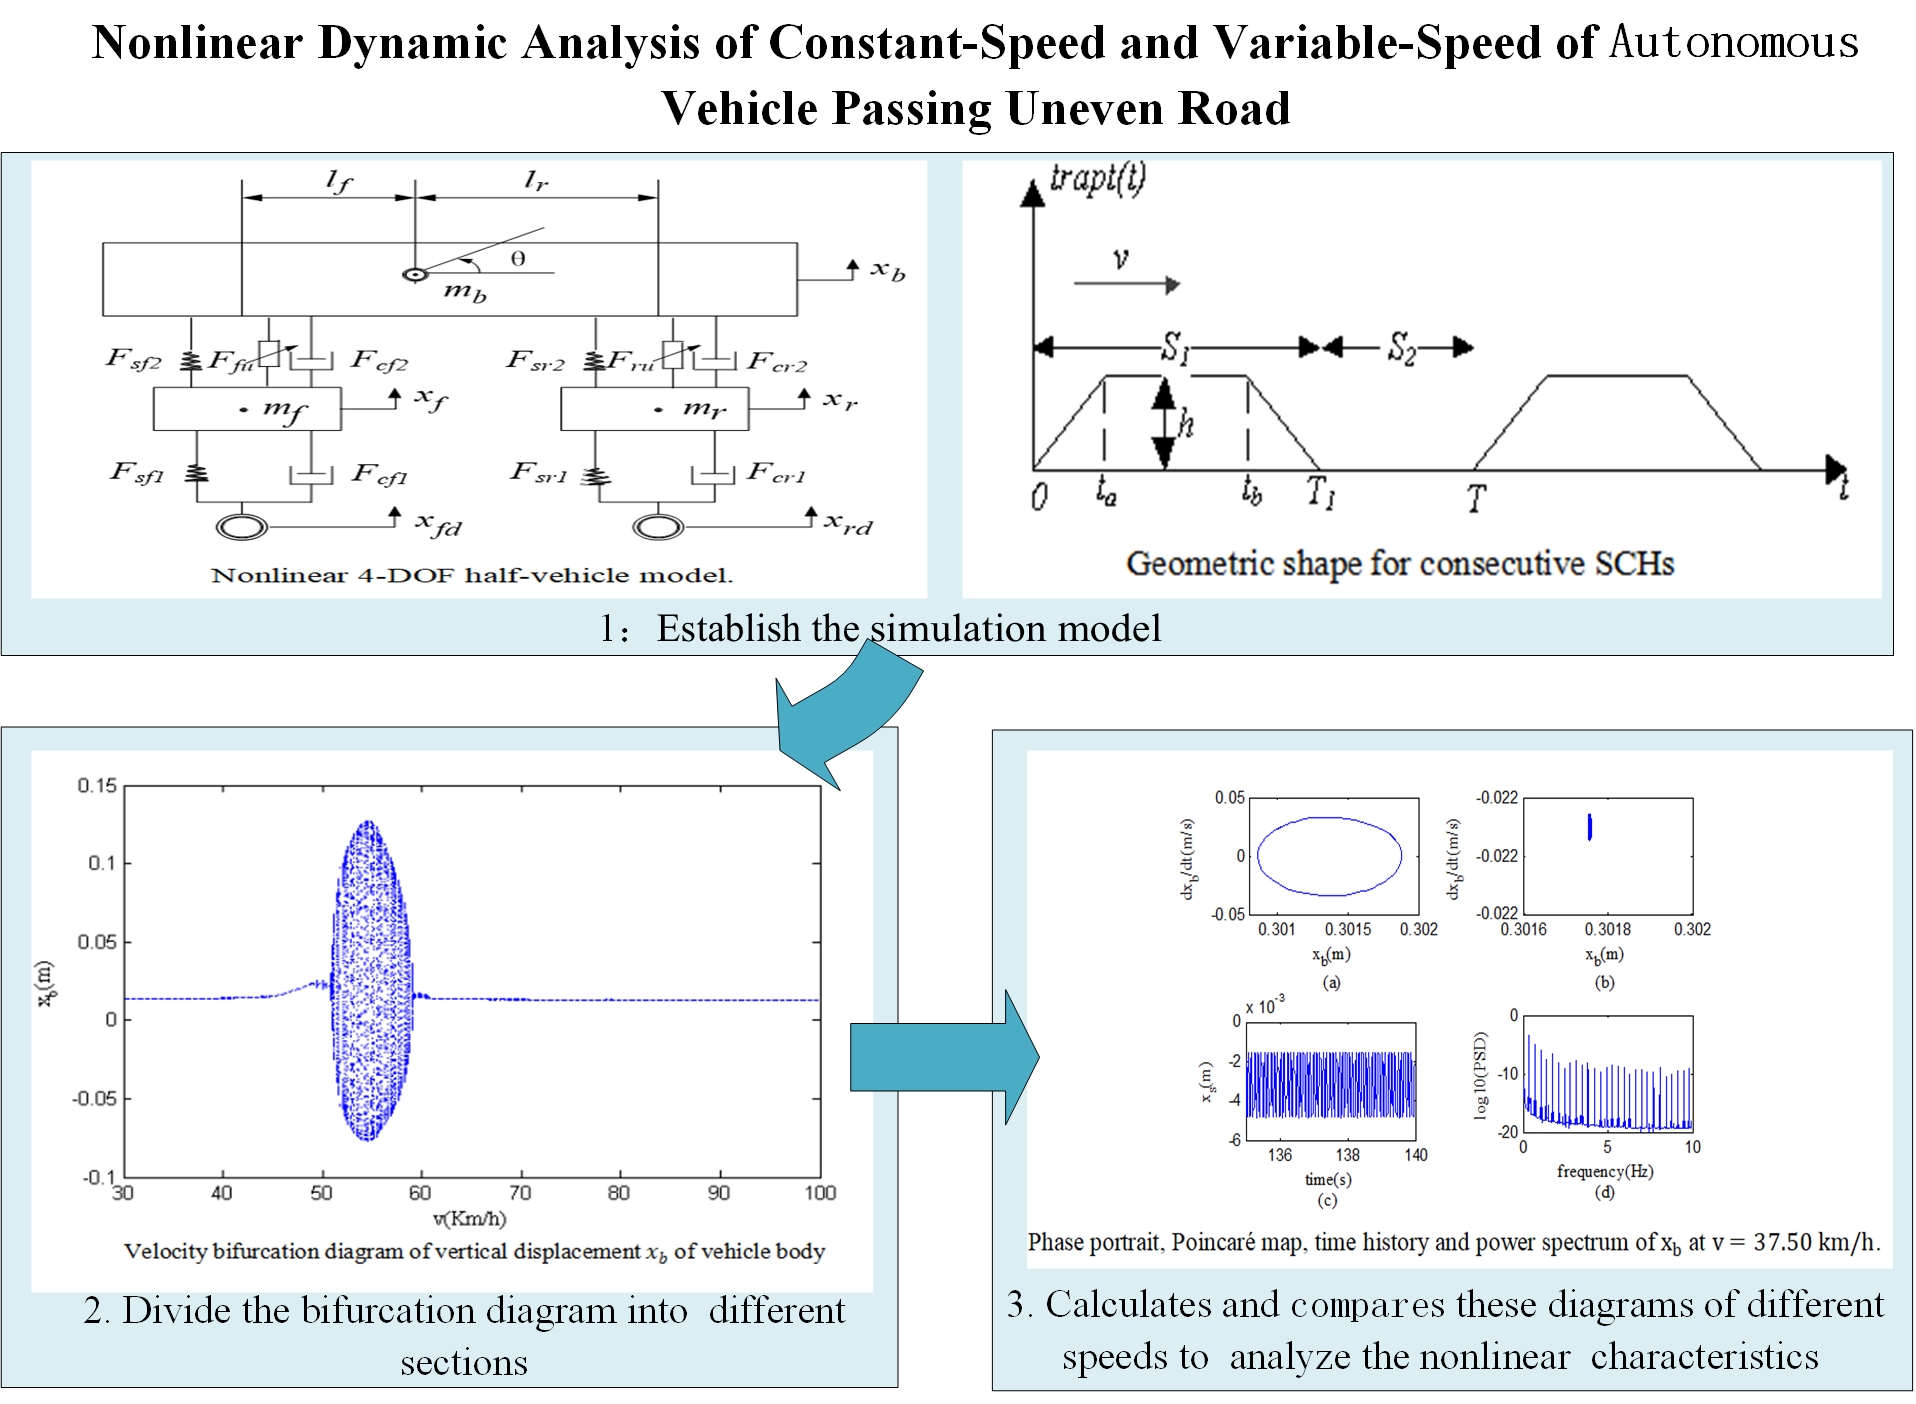 Nonlinear dynamic analysis of constant-speed and variable-speed of autonomous vehicle passing uneven road